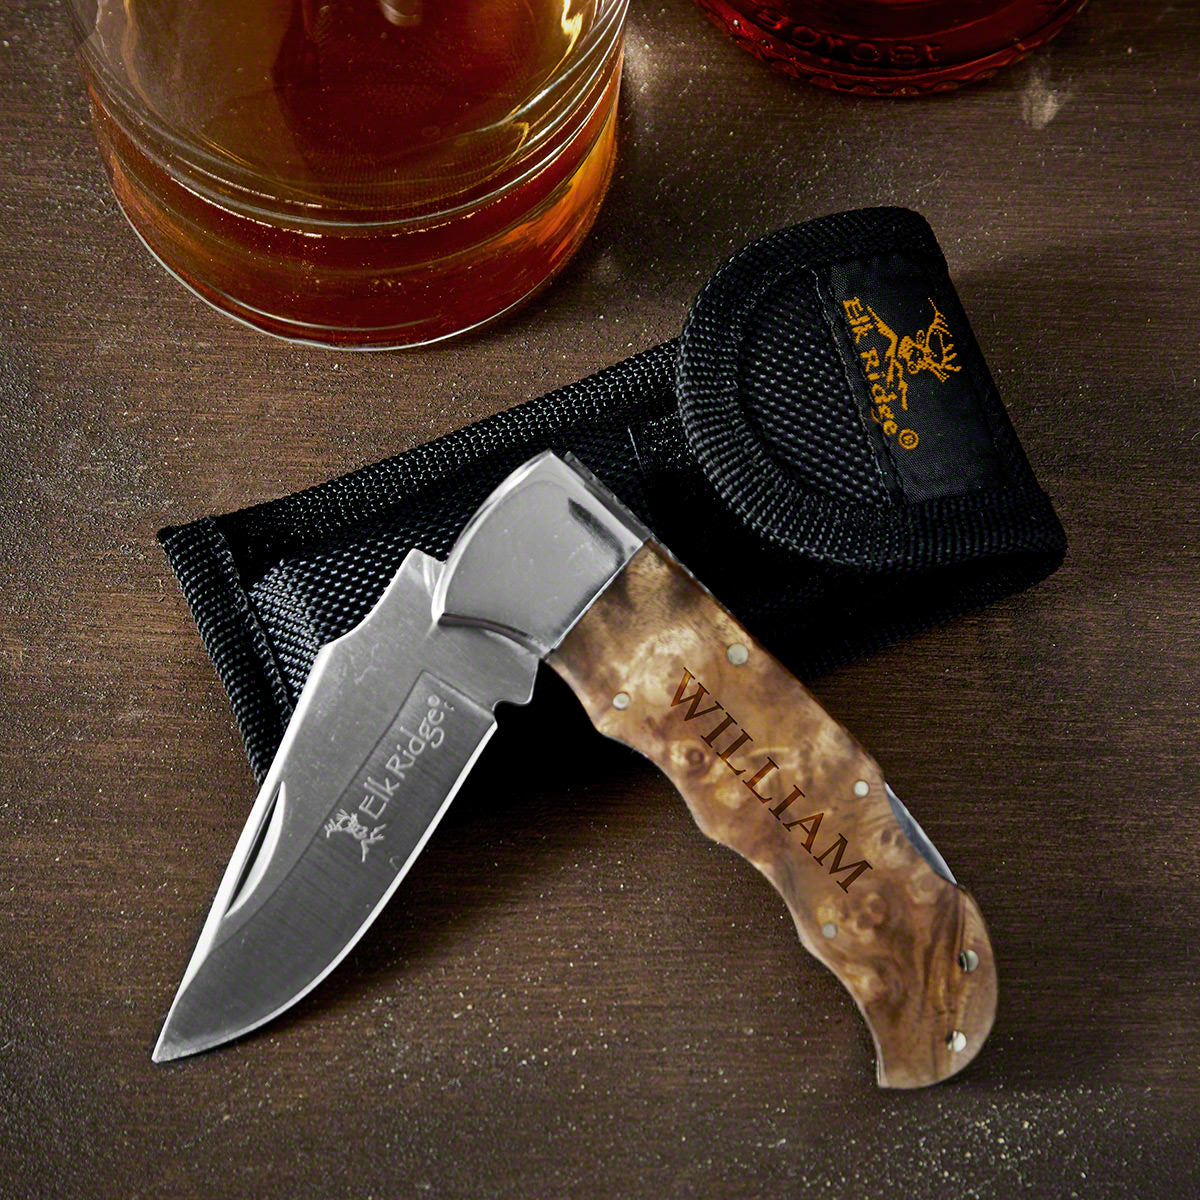 Gentlemans Knife with Engraved Gift Box